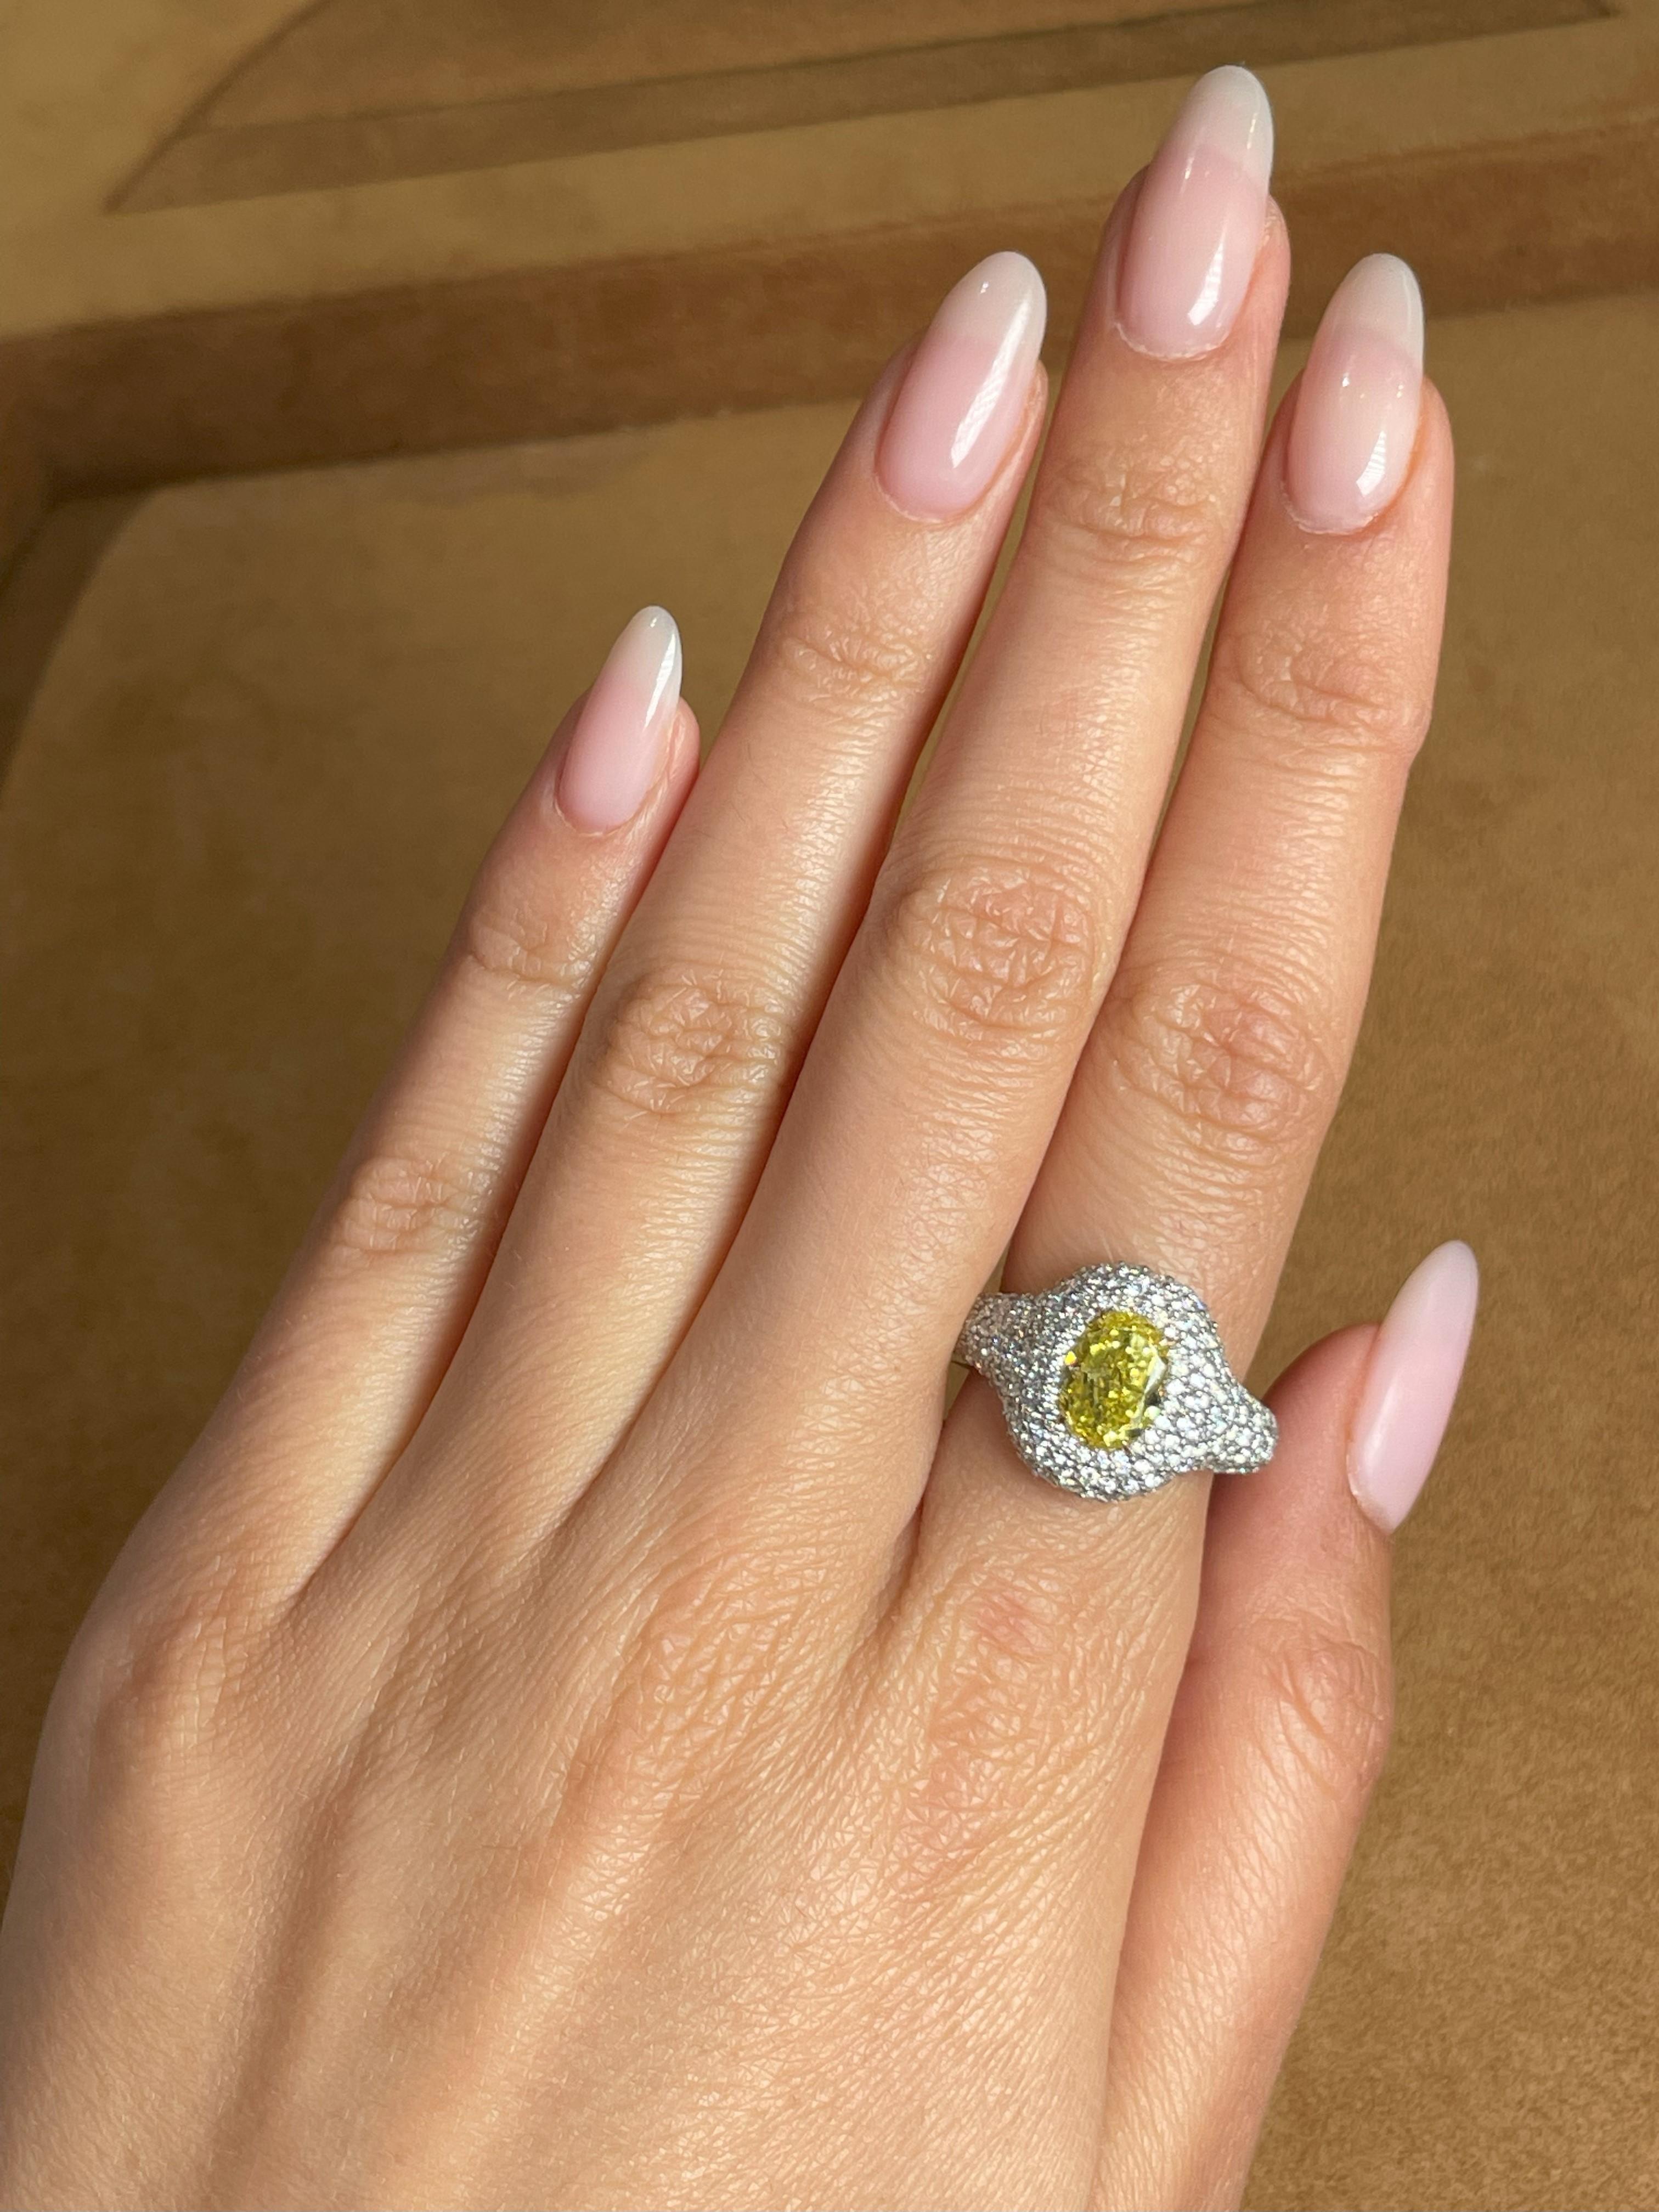 GIA Certified 1.73 Carat Fancy Vivid Yellow (highest intensity) Oval cut diamond, VS2 clarity. The classic design brings out the beauty of the center stone with the surrounding 204 round diamonds G color VS clarity, set in a polished 18k White and